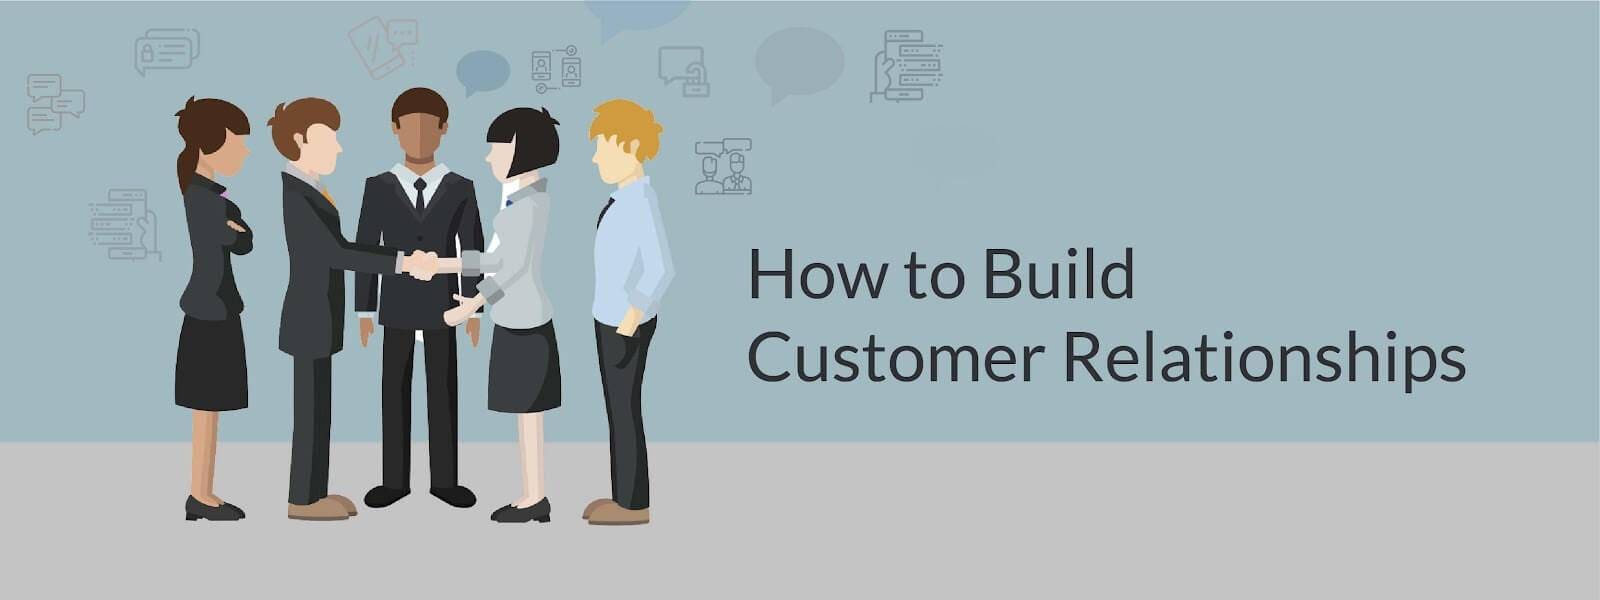 9. Use CRM to Get in Touch with Your Existing Customers